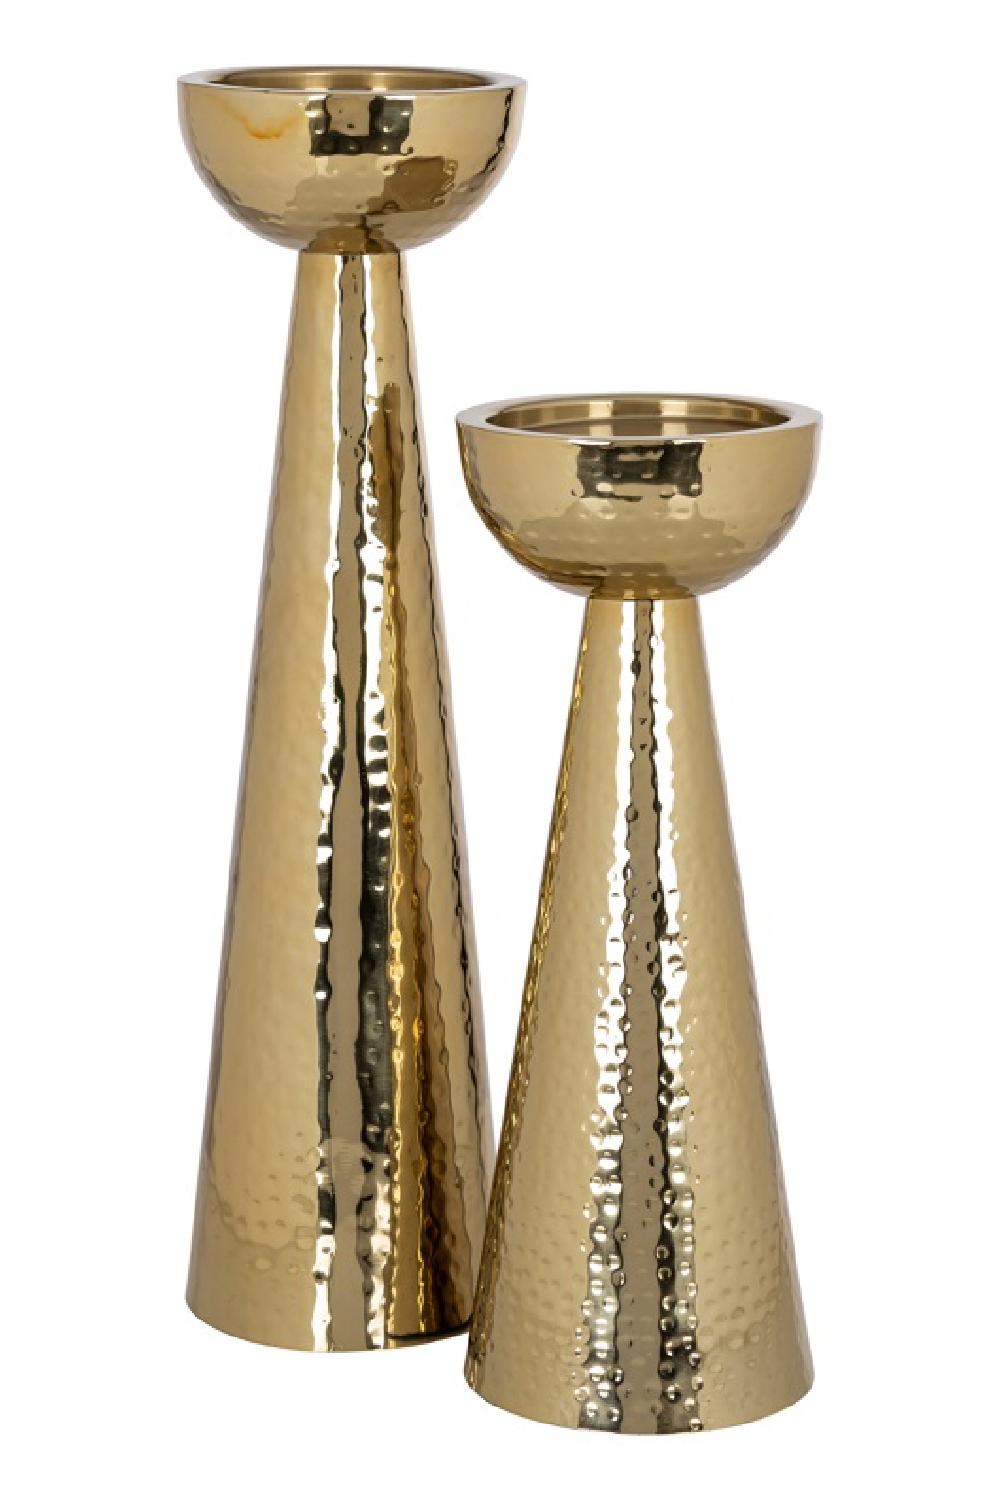 Gold Tapered Candle Holder S | OROA Lizz | Oroa.com